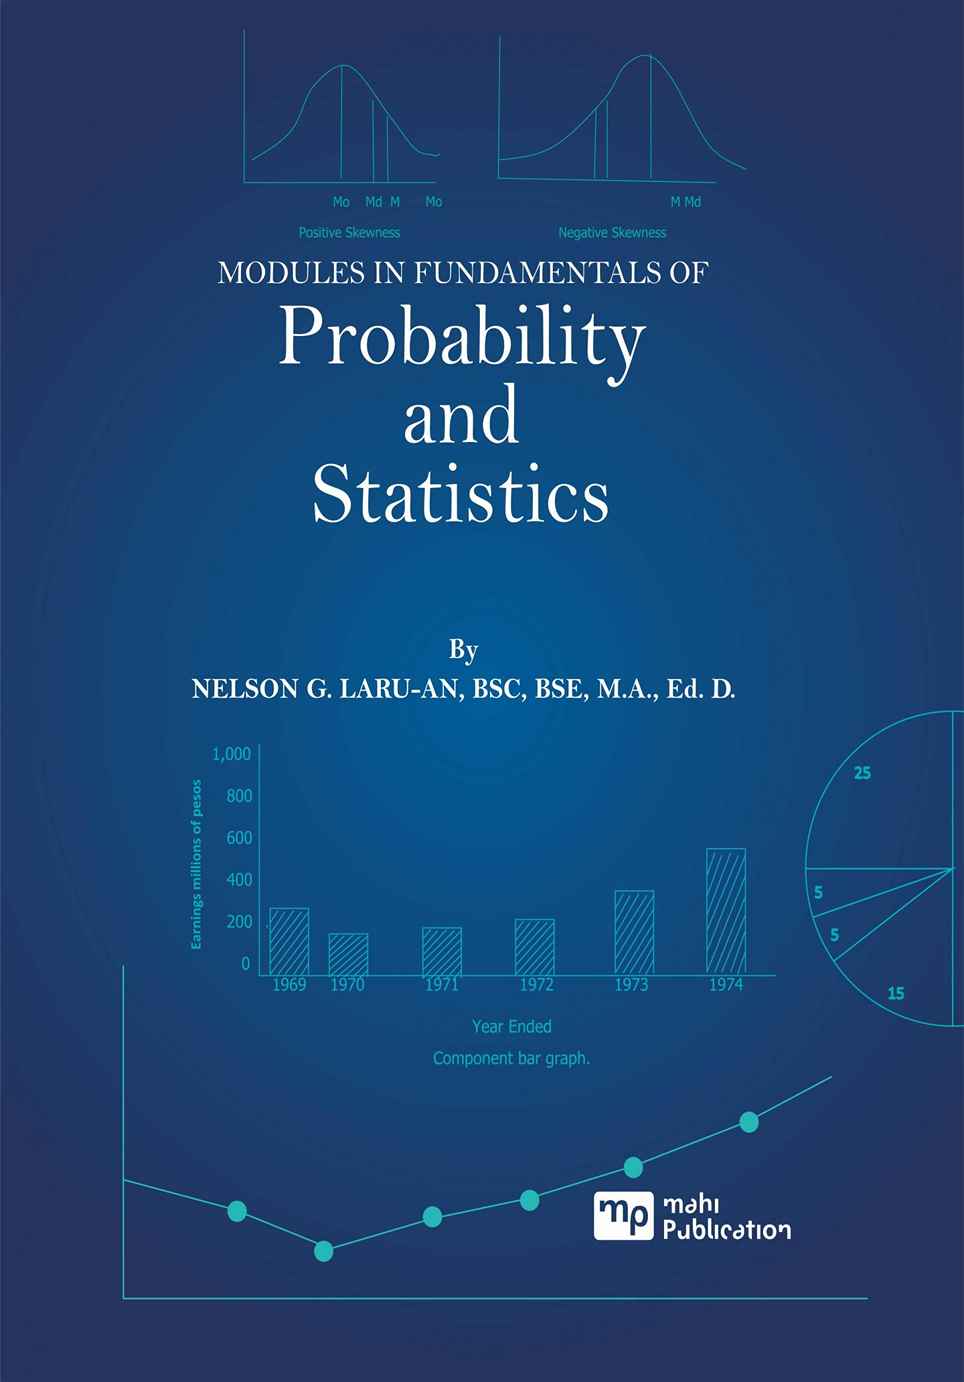  Modules in Fundamentals of Probability and Statistics